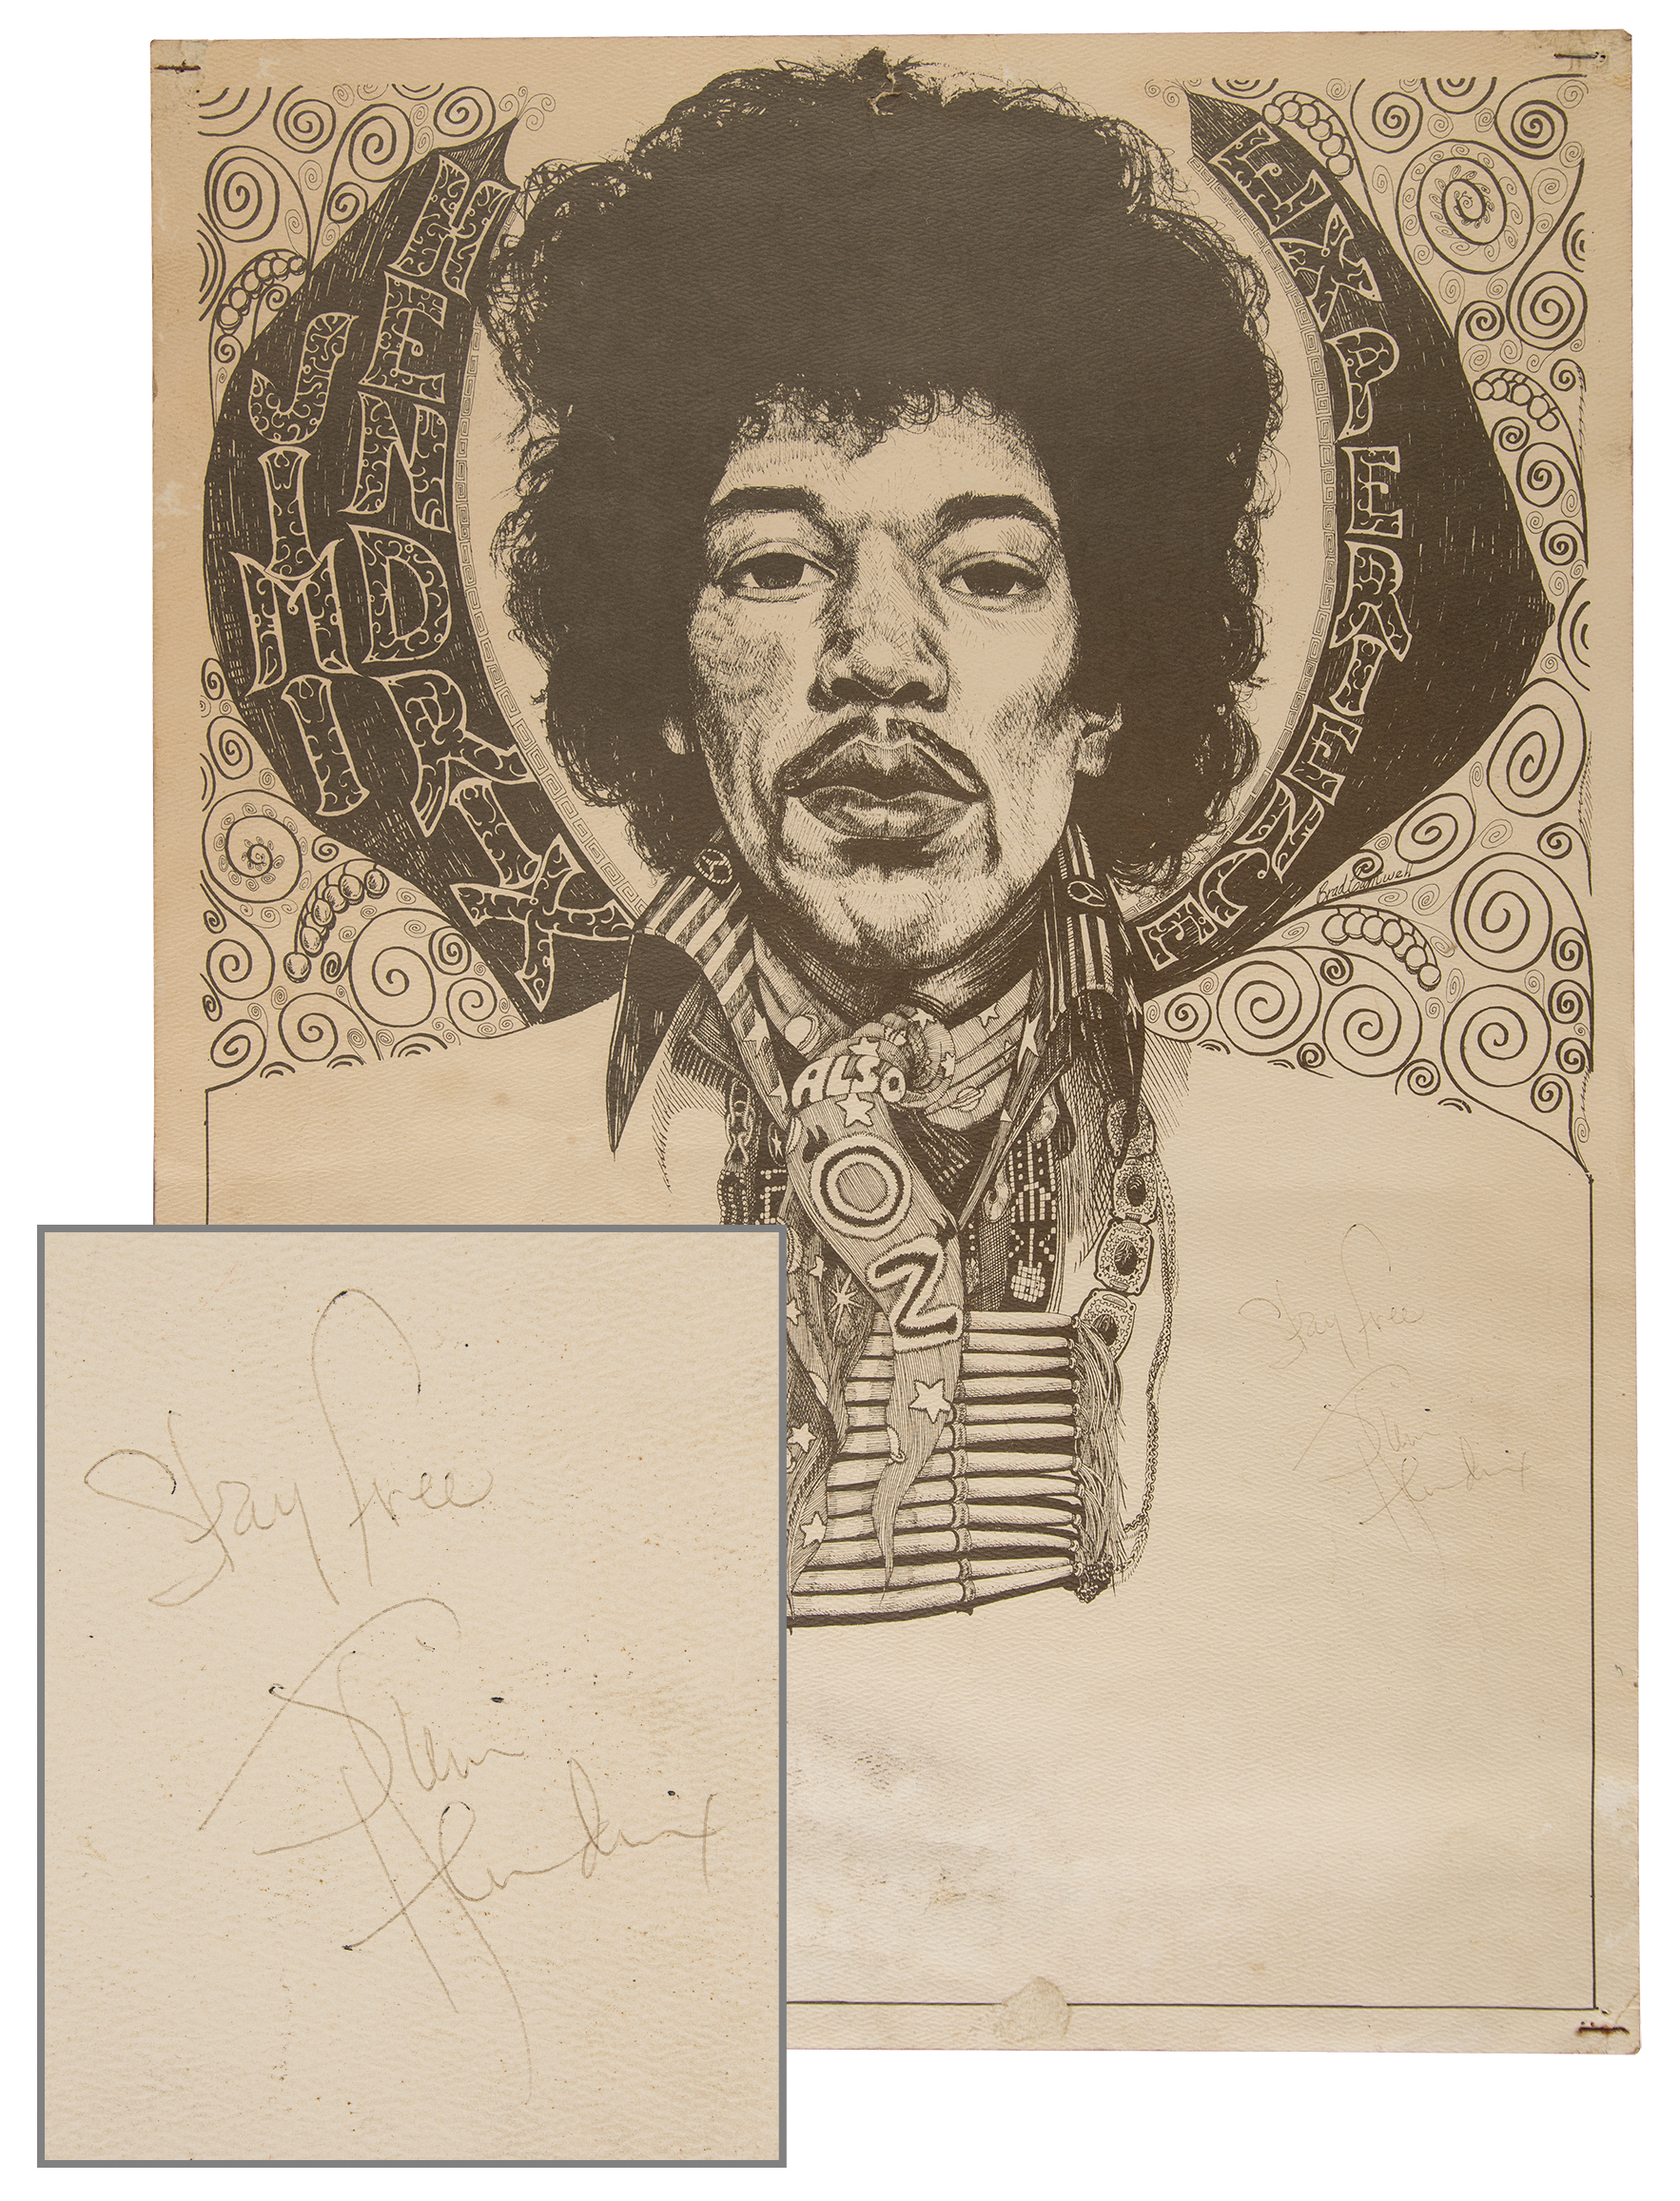 Lot #535 Jimi Hendrix Signed 1970 Milwaukee Concert Poster from The Cry of Love Tour - Image 1